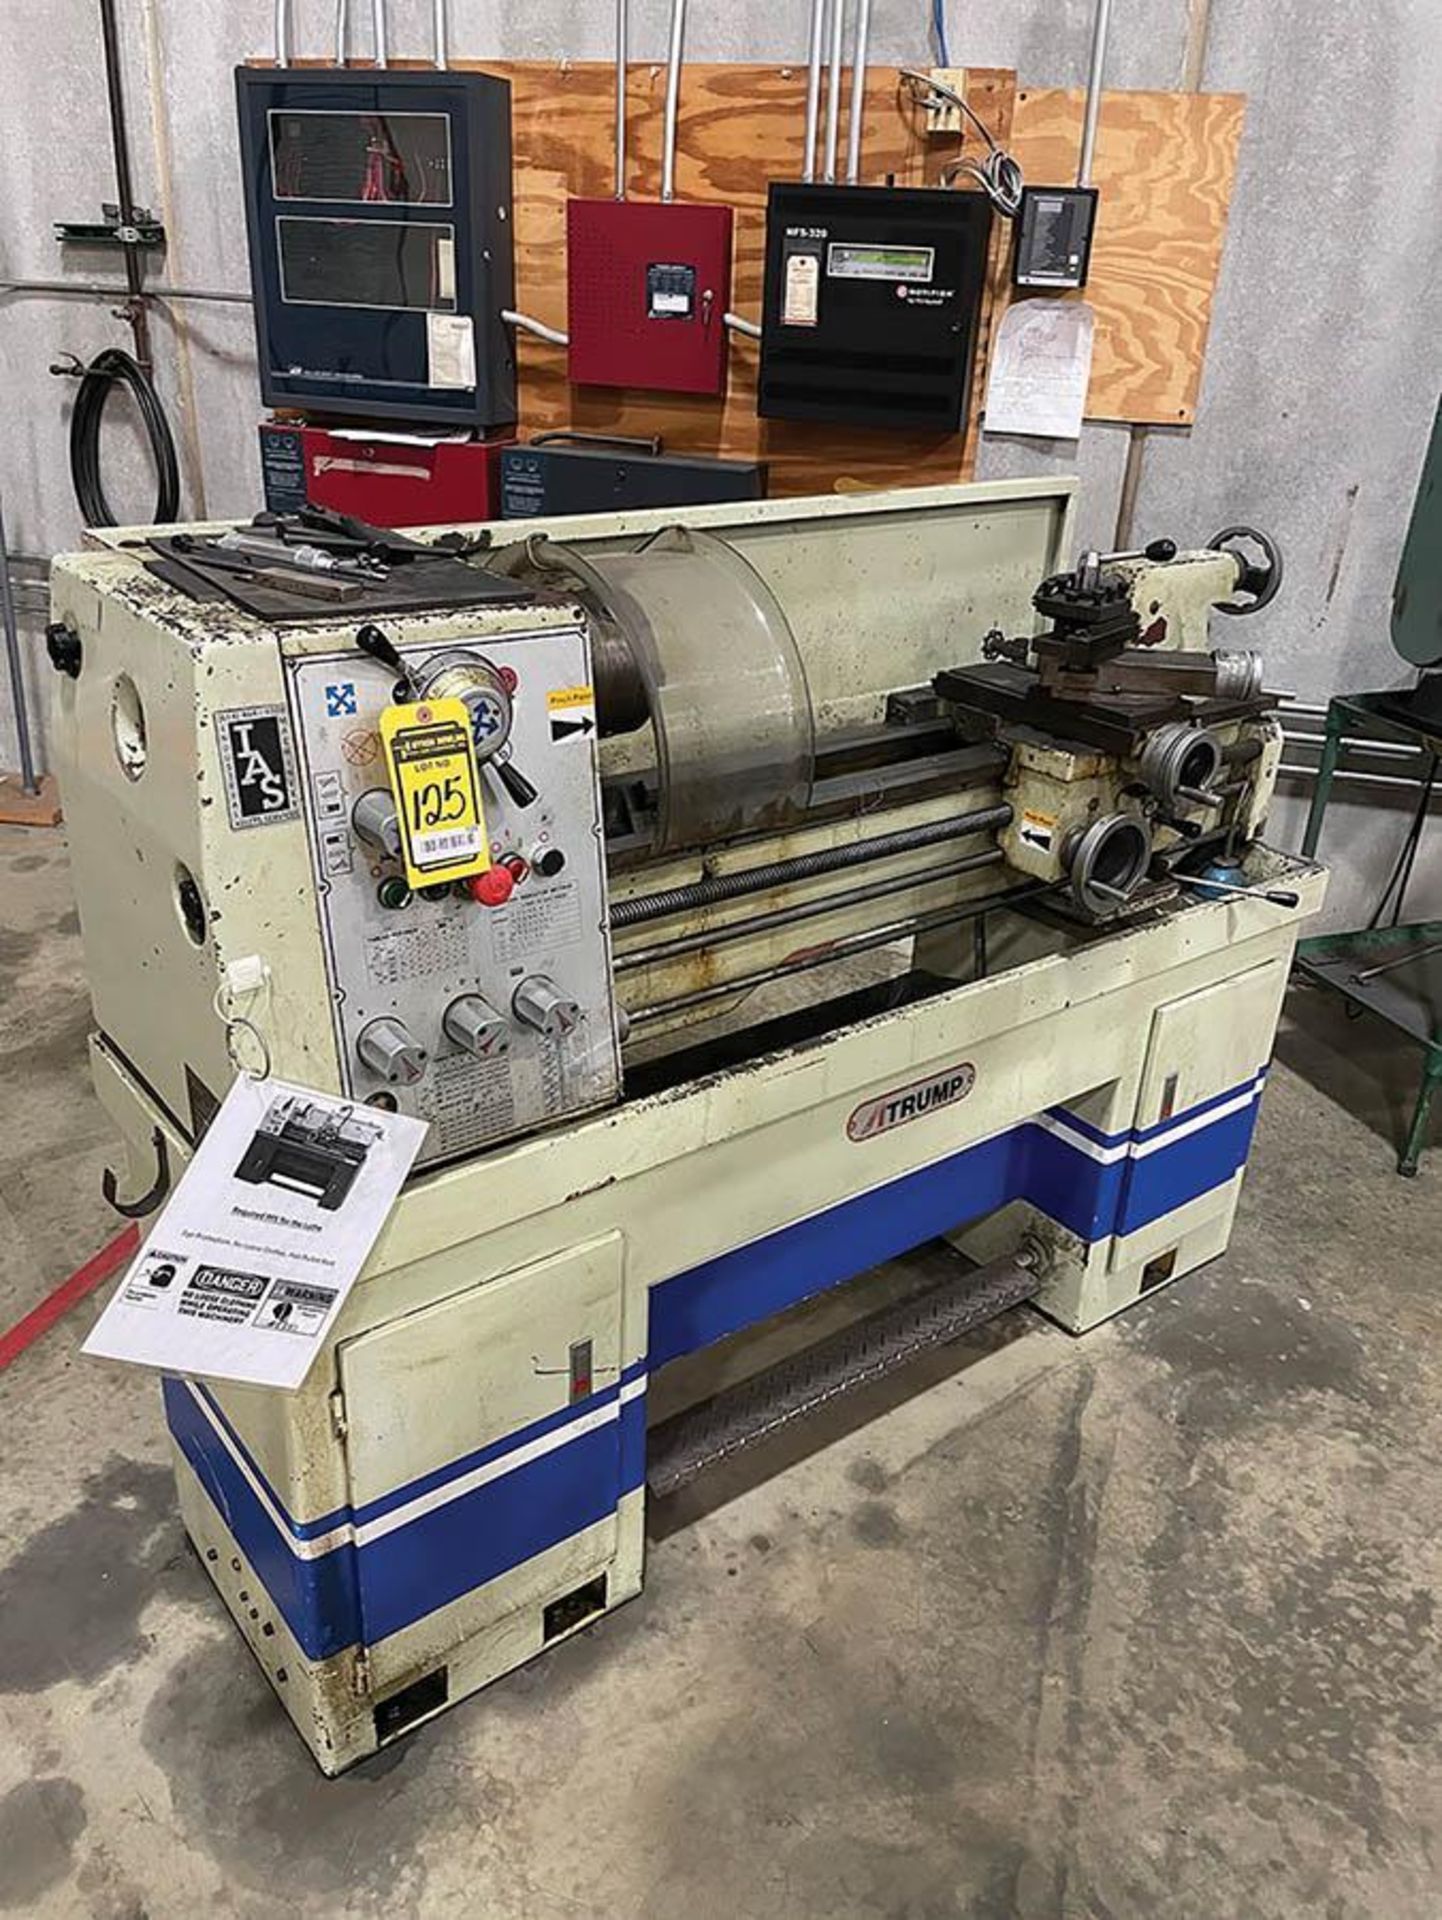 1994 ATRUMP 1440 GH SHOP LATHE, 6'' 3-JAW CHUCK, TAILSTOCK, TOOL HOLDER, S/N 7173046 - Image 2 of 2